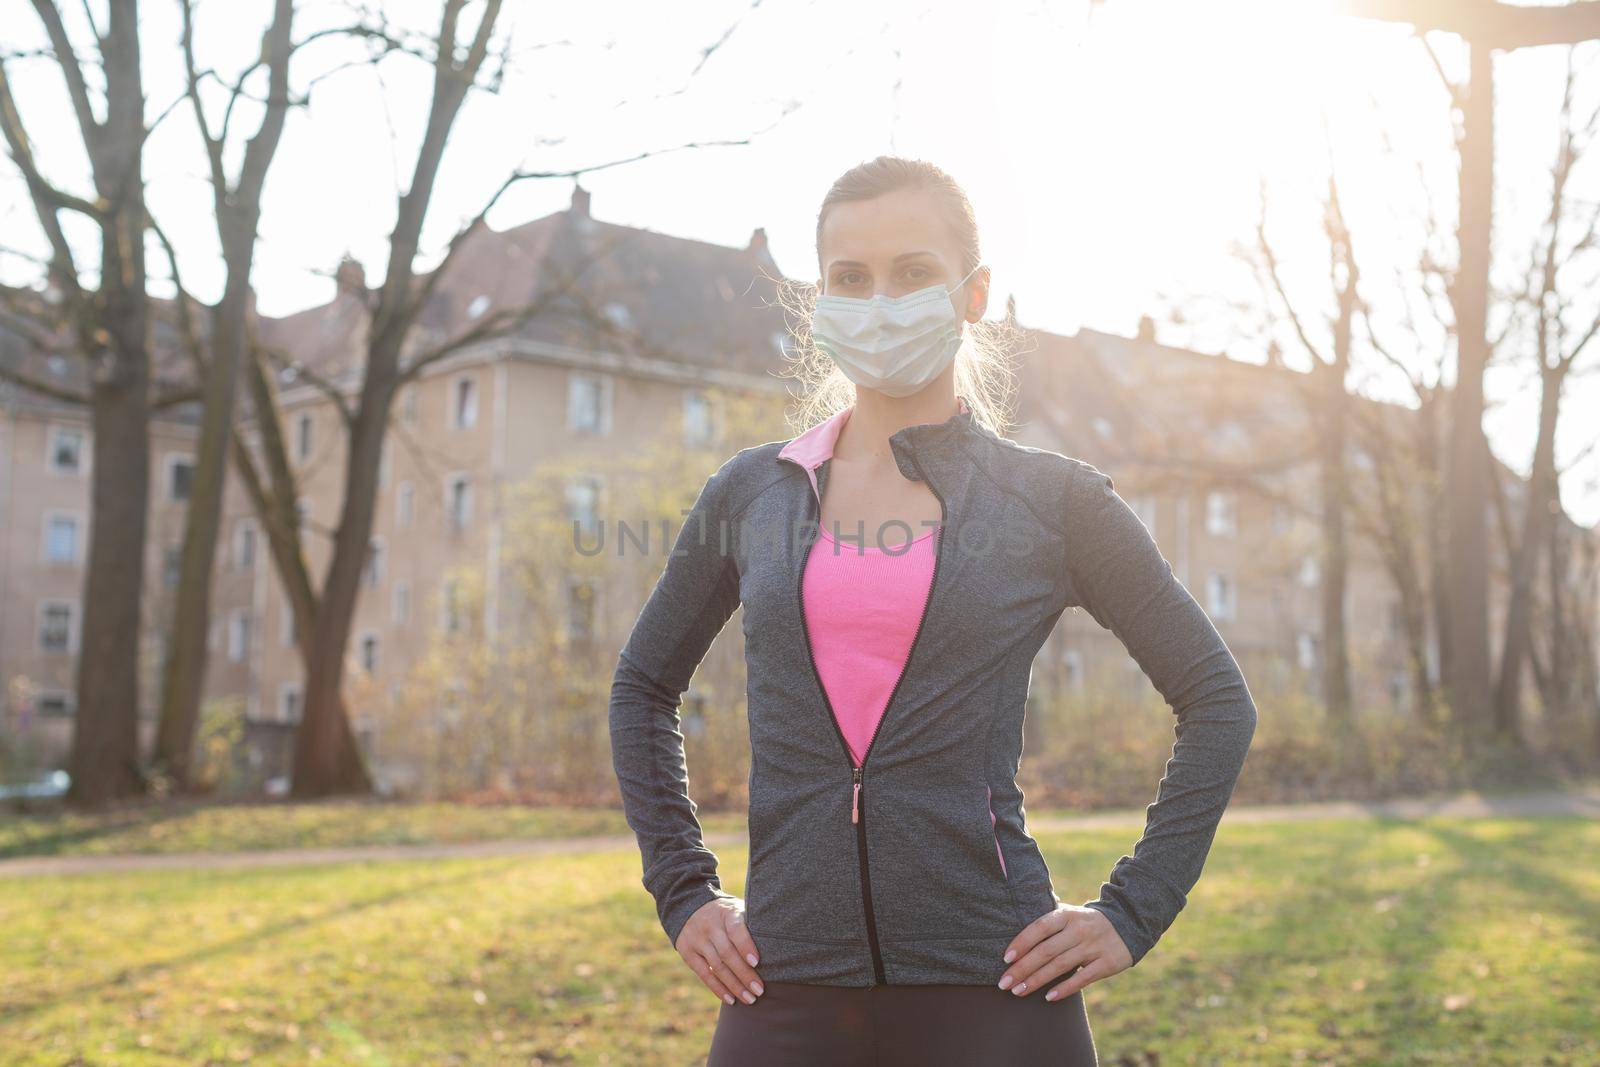 Fit woman during health crisis exercising outdoors wearing mask by Kzenon